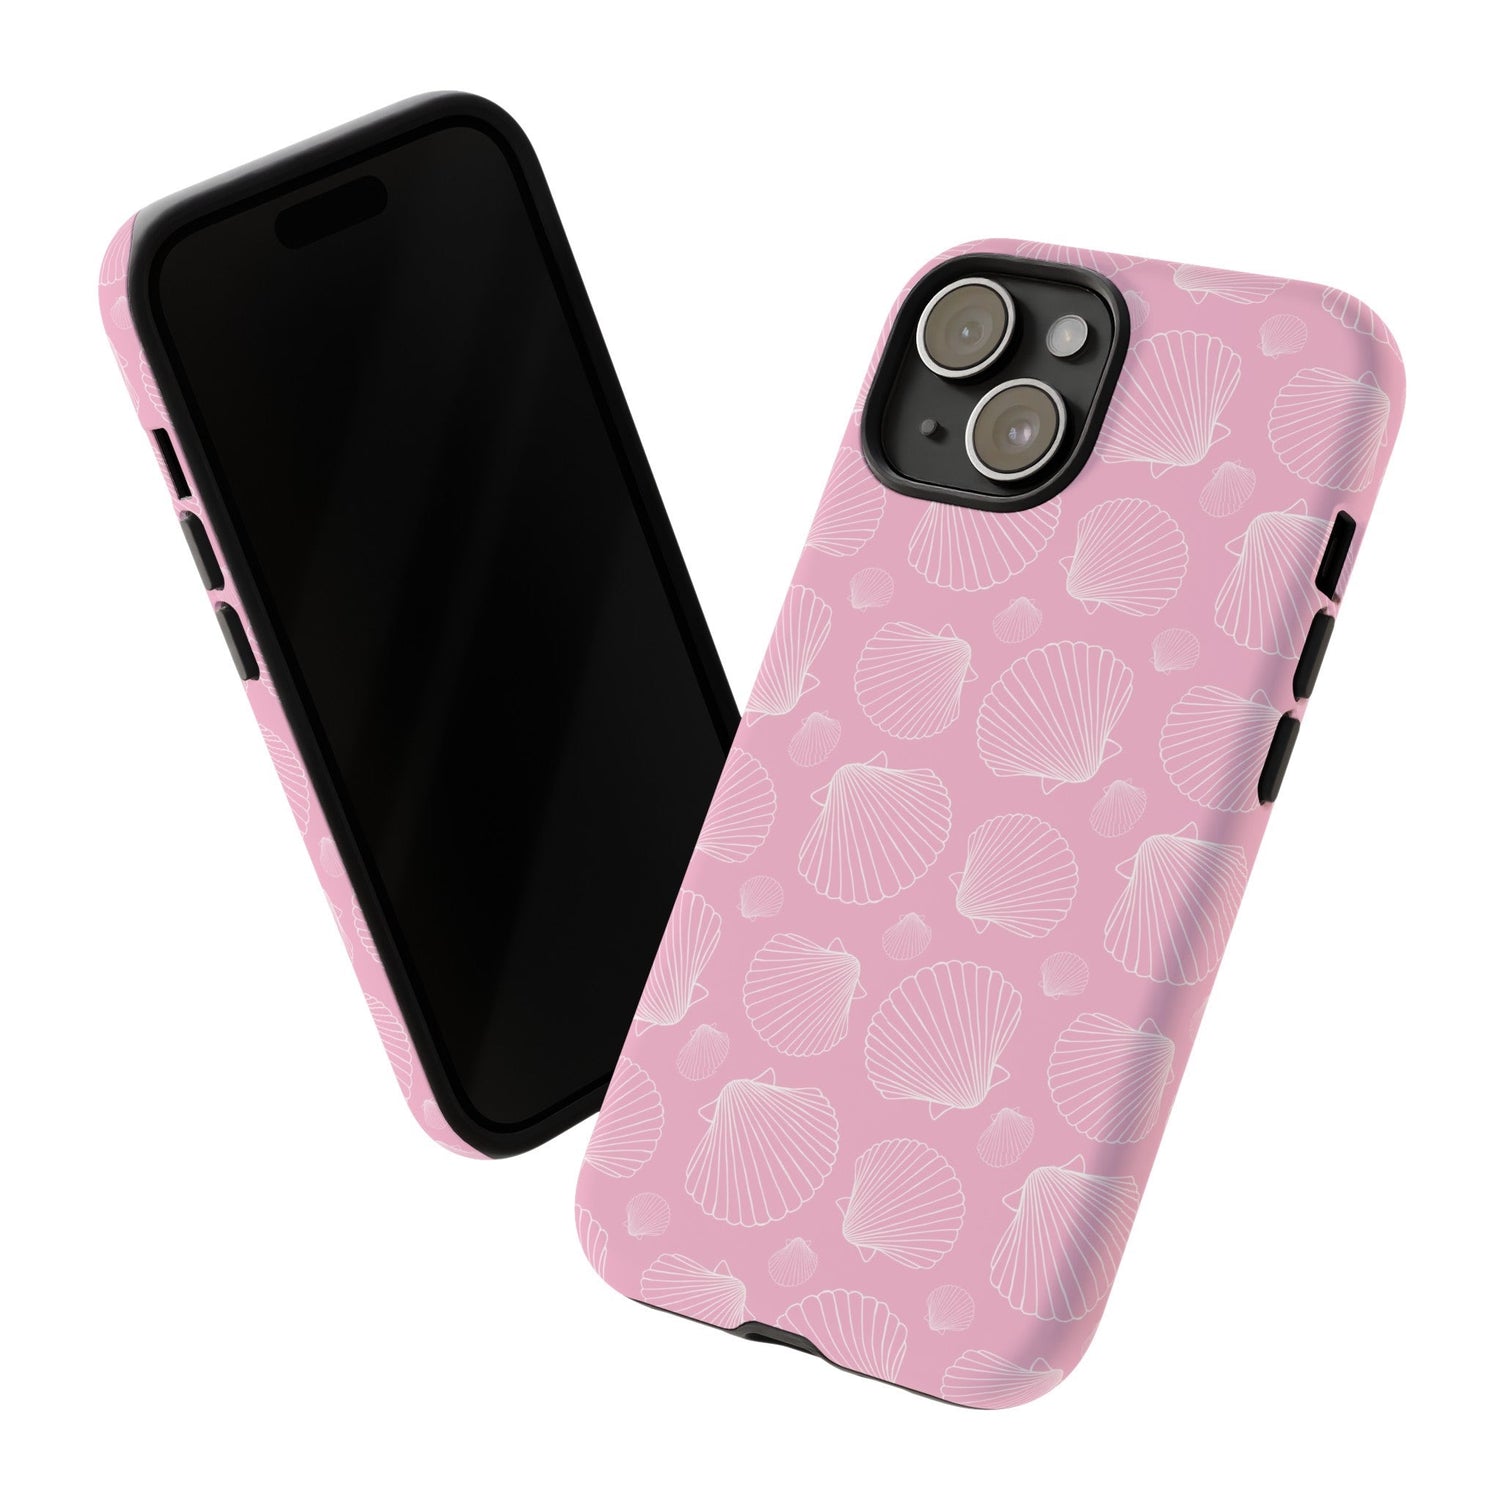 Ultra durable iPhone case